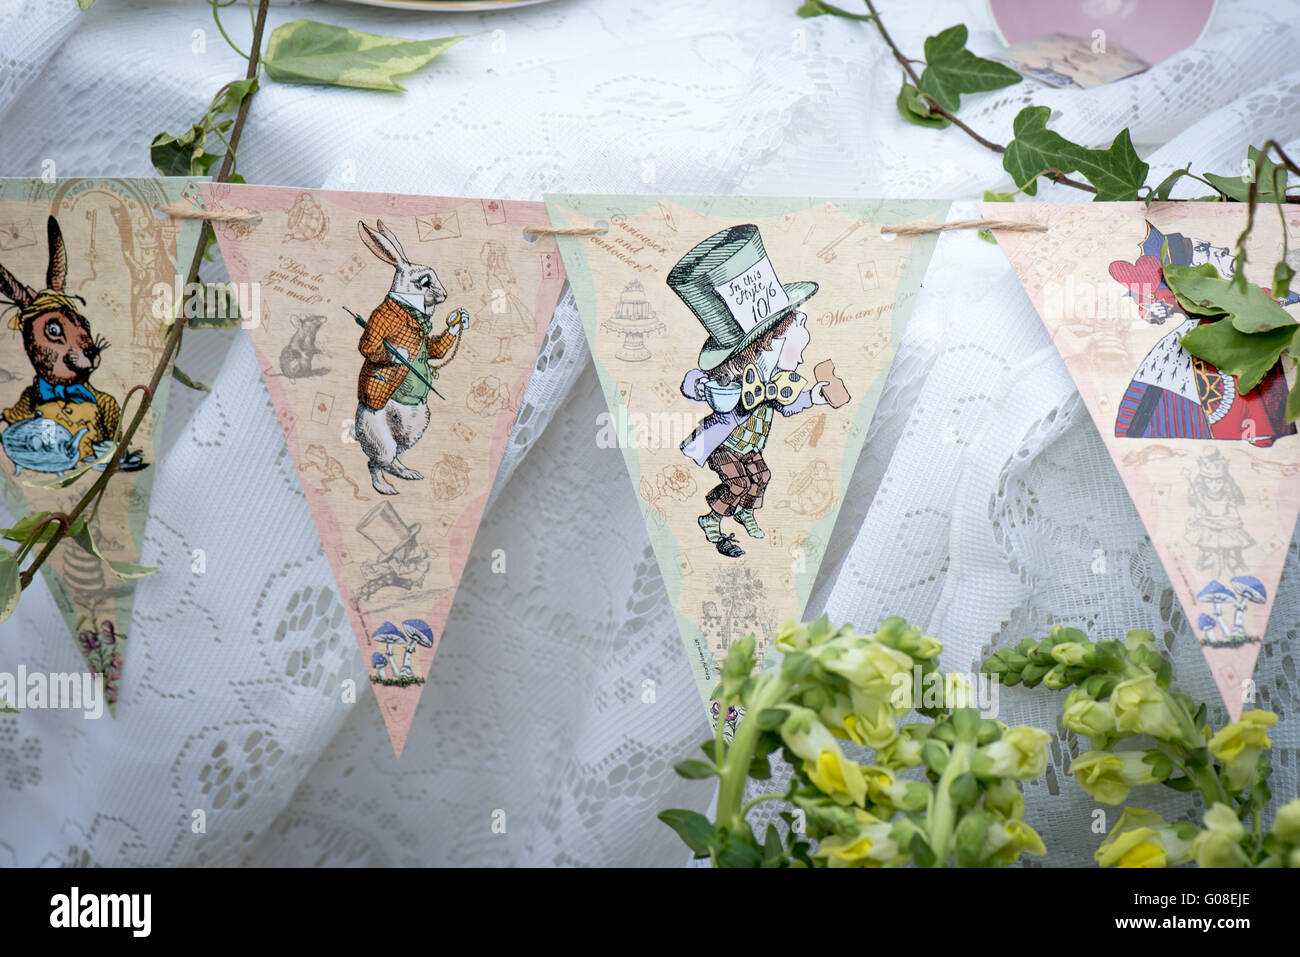 Mad Hatter afternoon tea party decorations at Cake International – The Sugarcraft, Cake Decorating and Baking Show in London Stock Photo